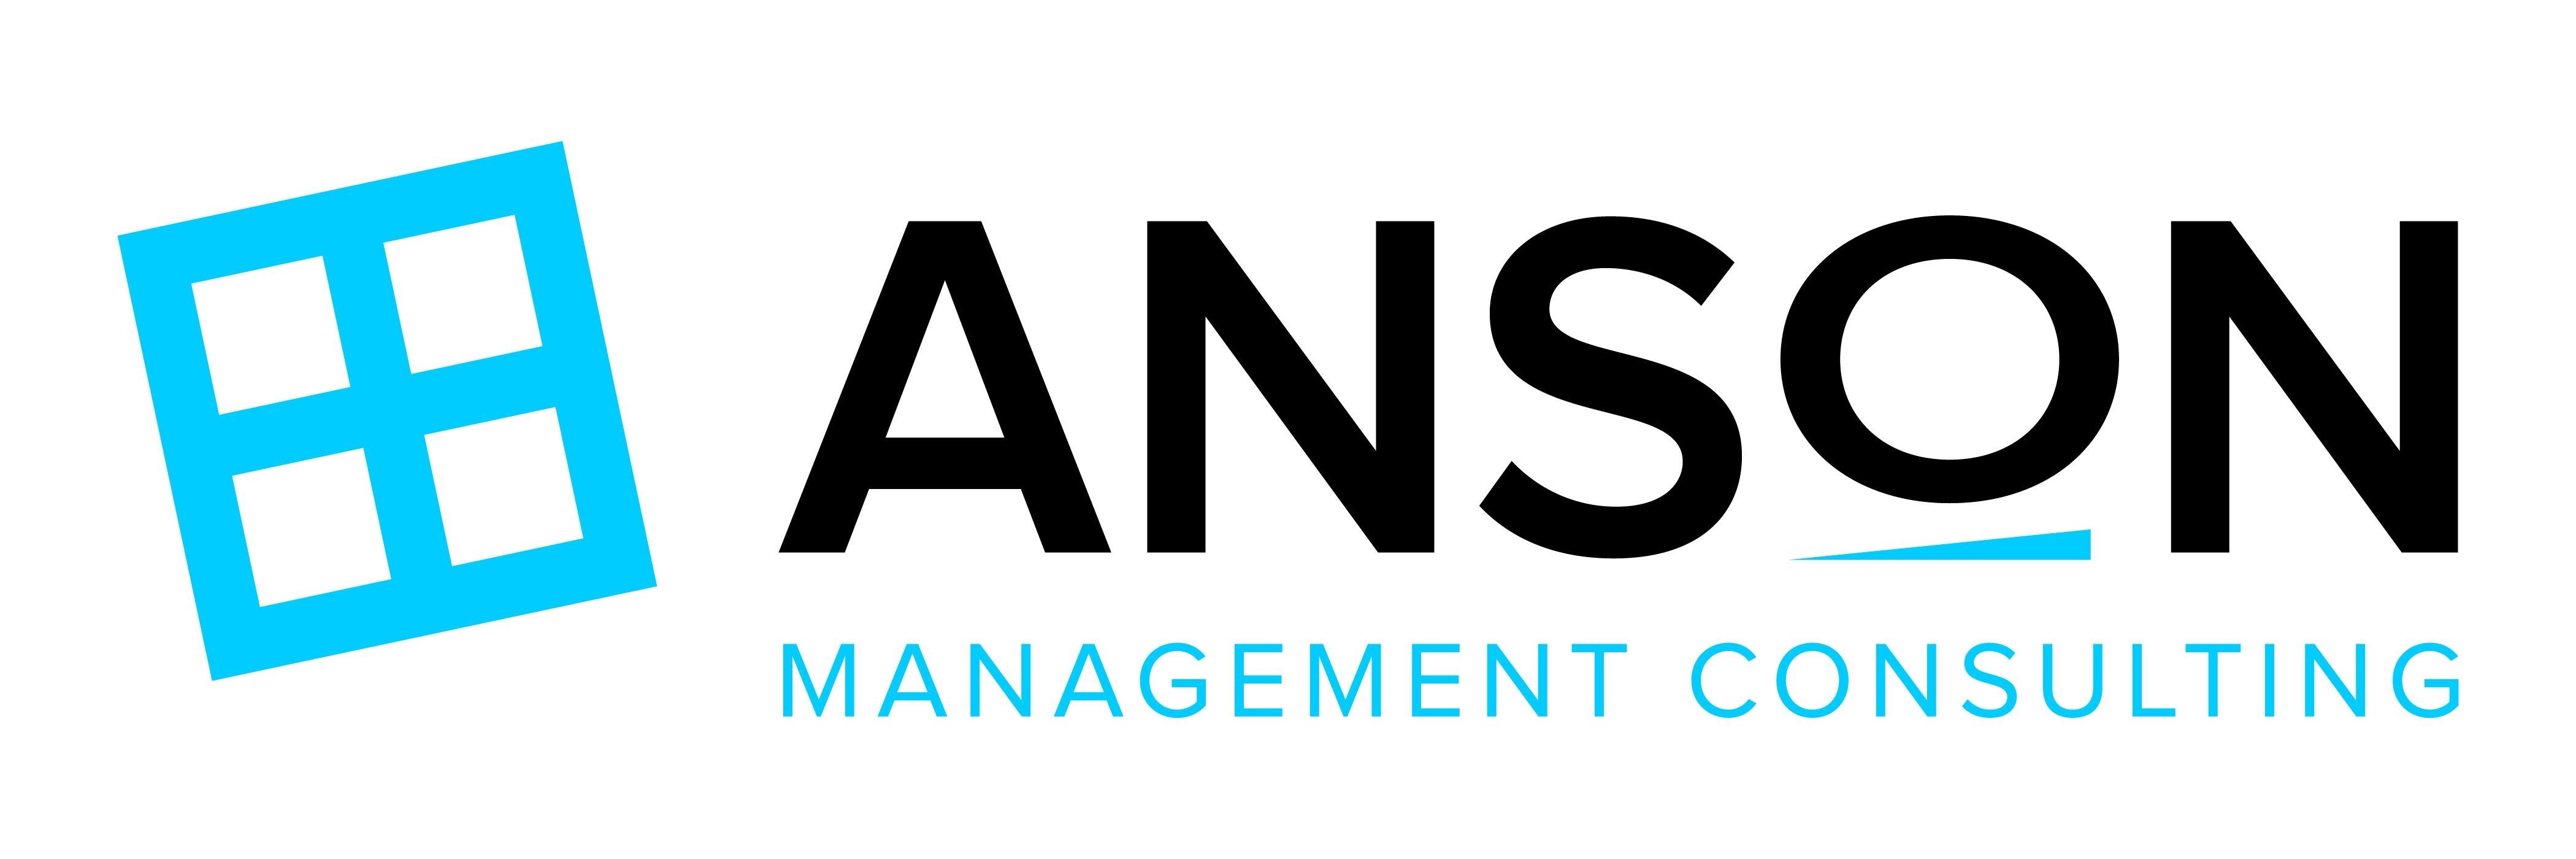 ANSON Management Consulting